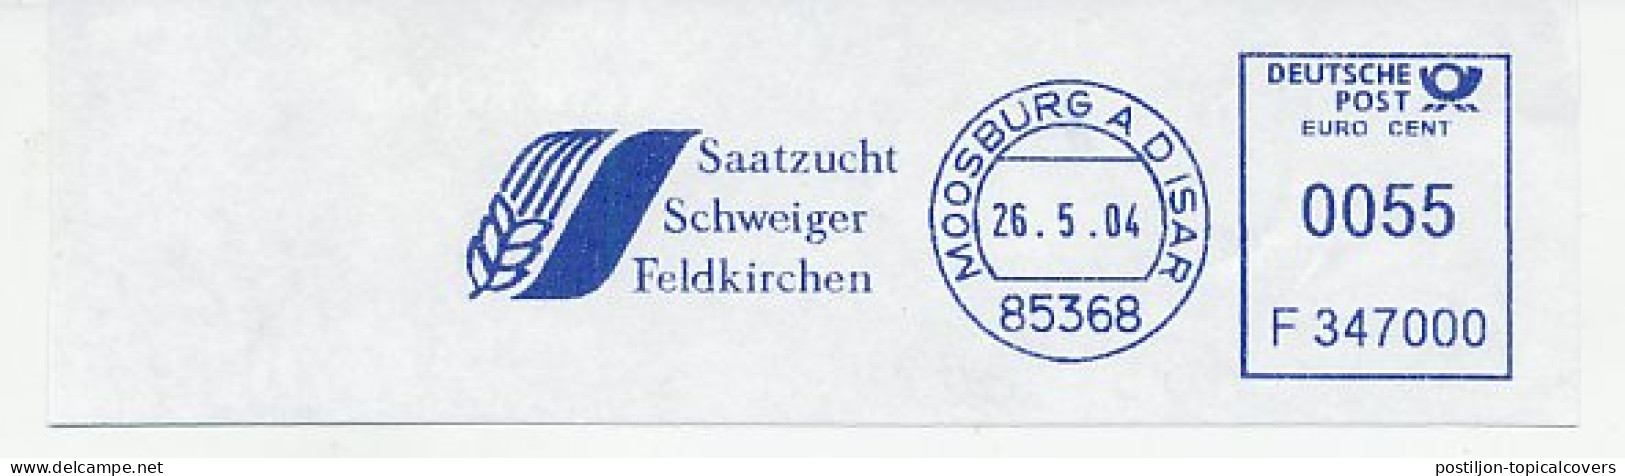 Meter Cut Germany 2004 Seed Production - Agricoltura